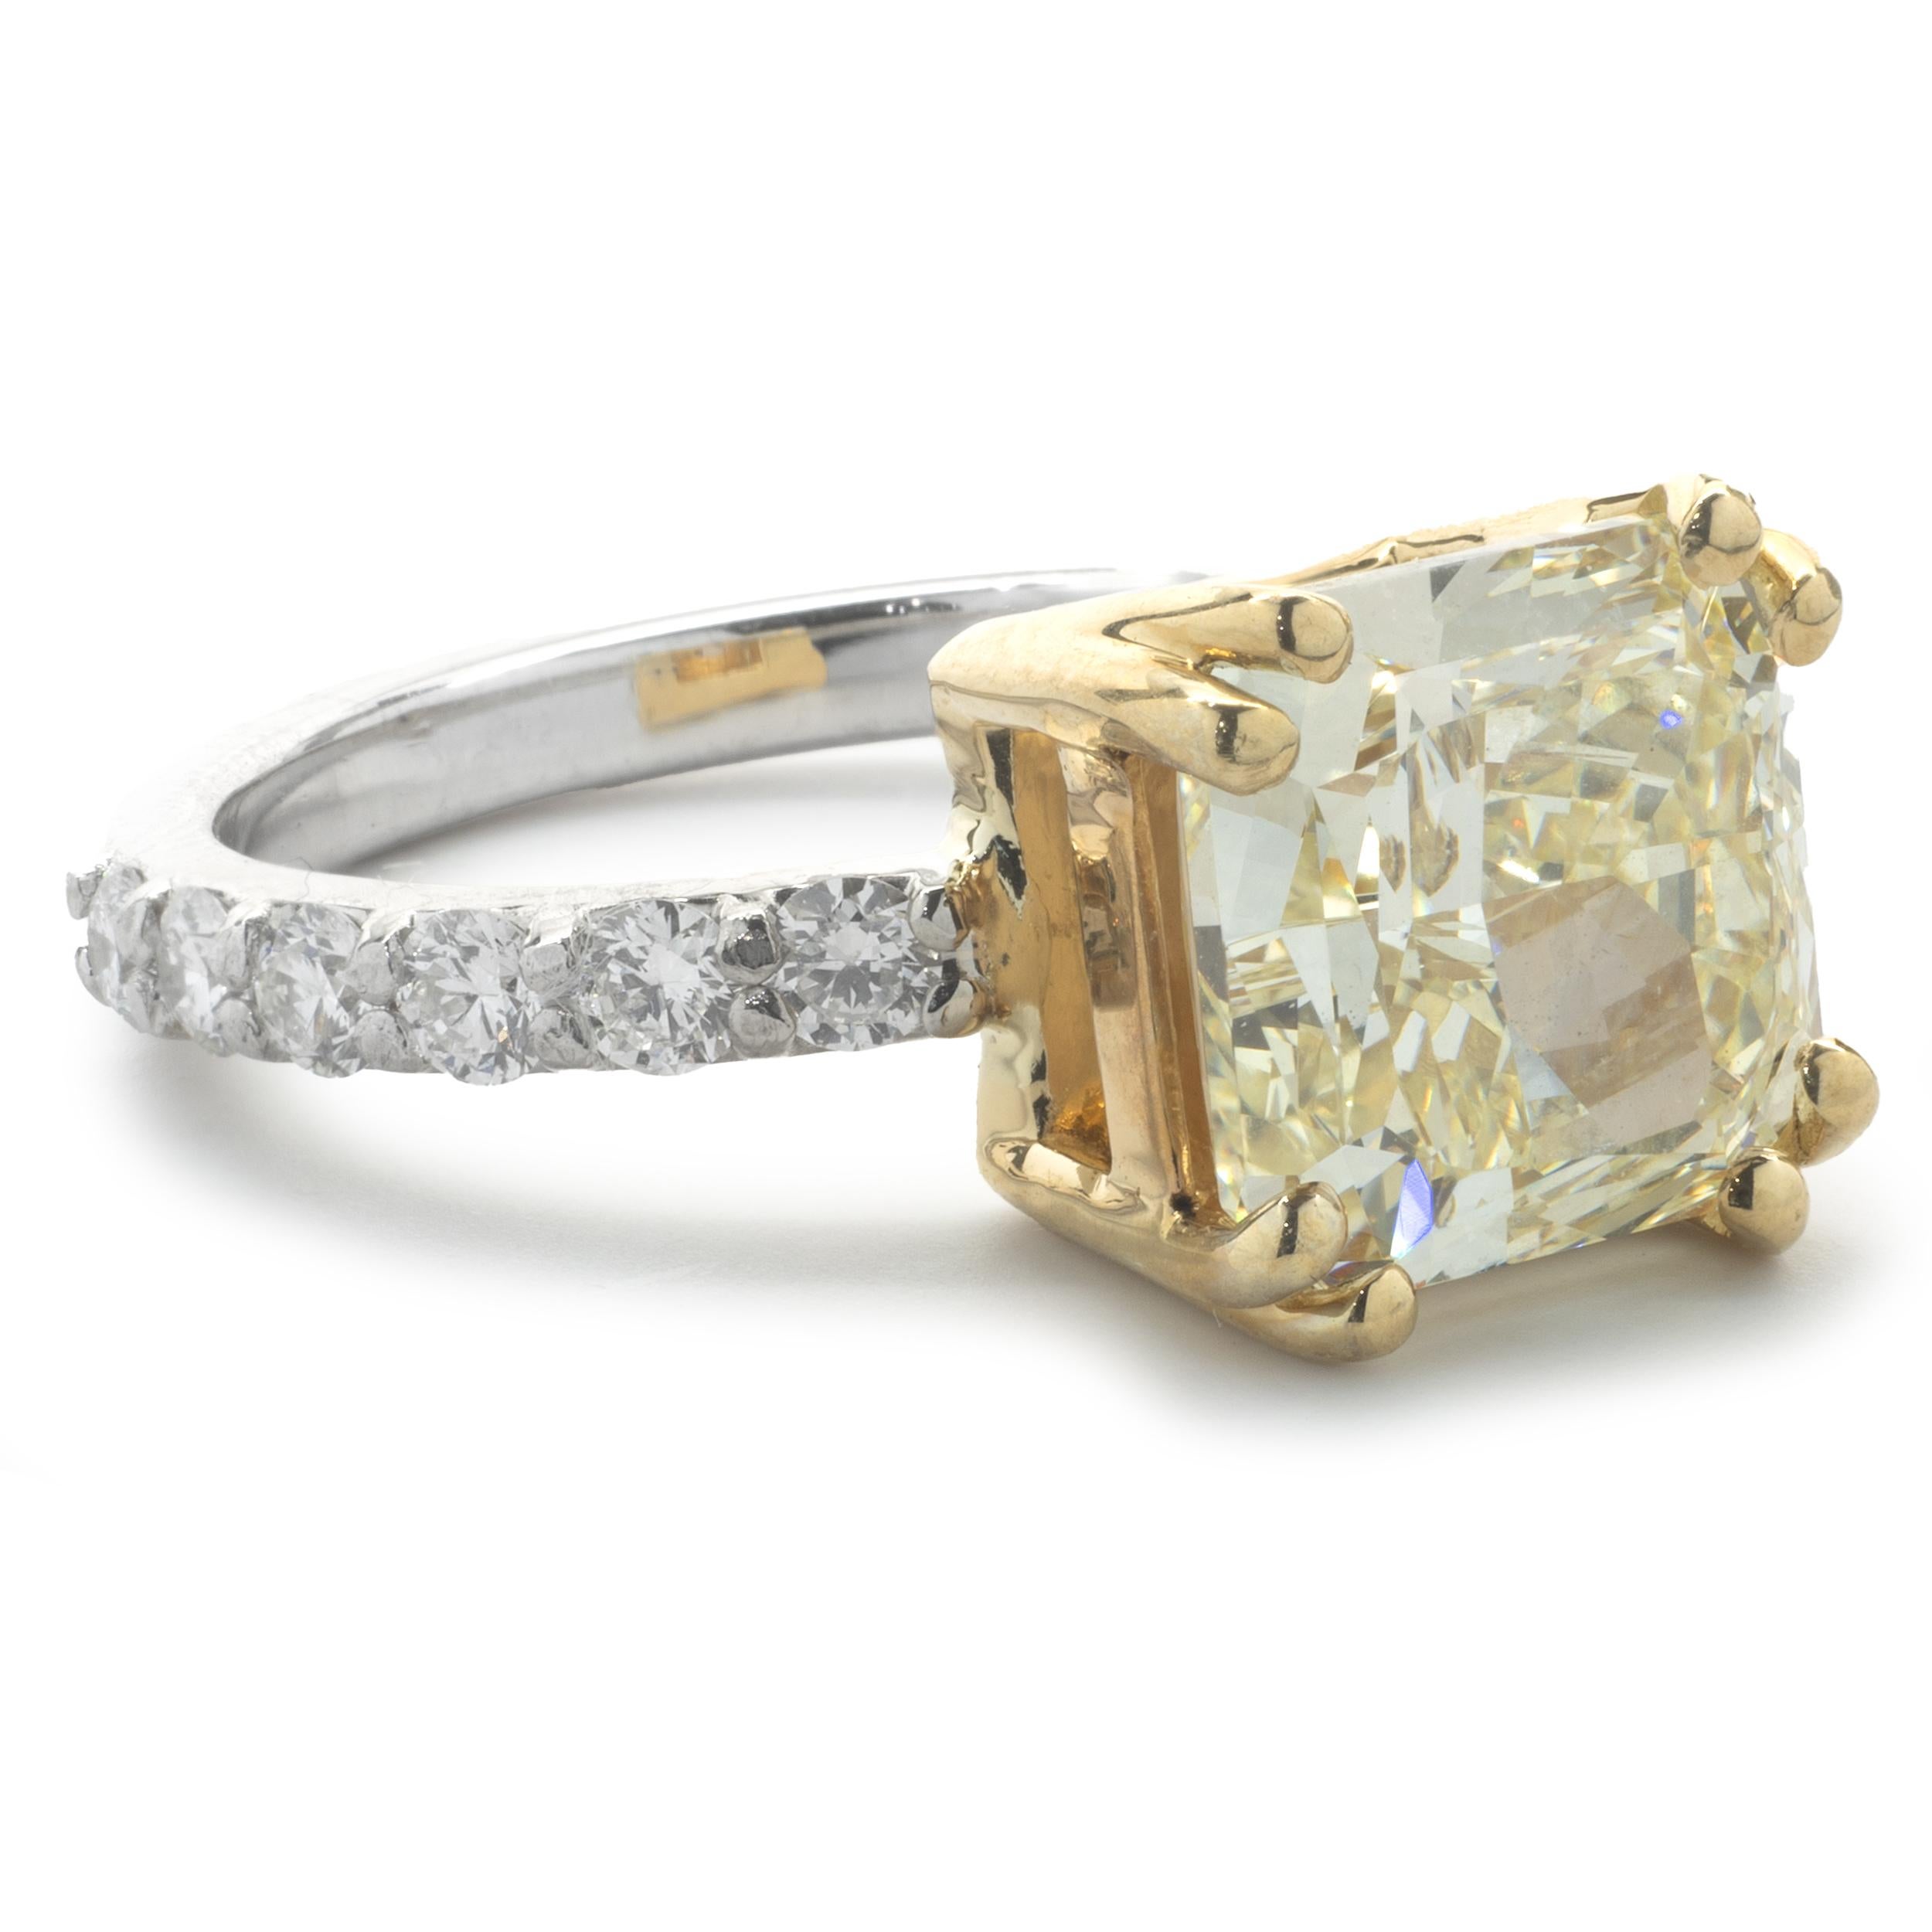 Designer: custom
Material: 14K yellow and white gold
Diamond: 1 cushion cut = 4.05ct
Color: Fancy Yellow
Clarity: VS1
GIA: 2155447660
Diamond: 12 round brilliant cut = .60cttw
Color: G
Clarity: VS1
Ring Size: 7 (please allow up to 2 additional